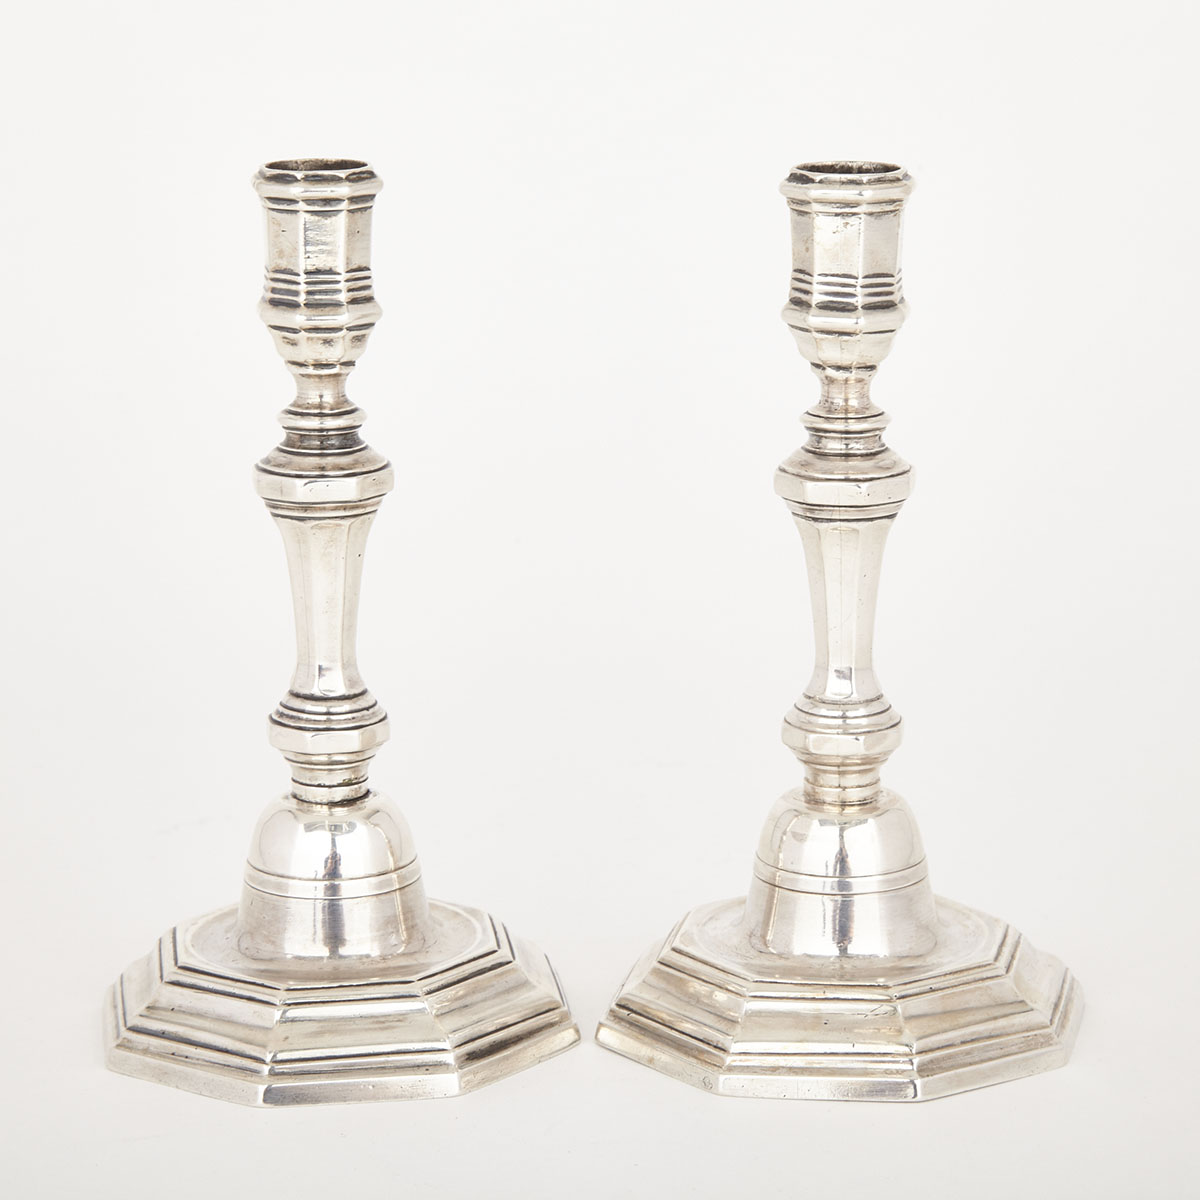 Pair of French Silver Octagonal Candlesticks, Jean Clement, Marseille, c.1750-1756